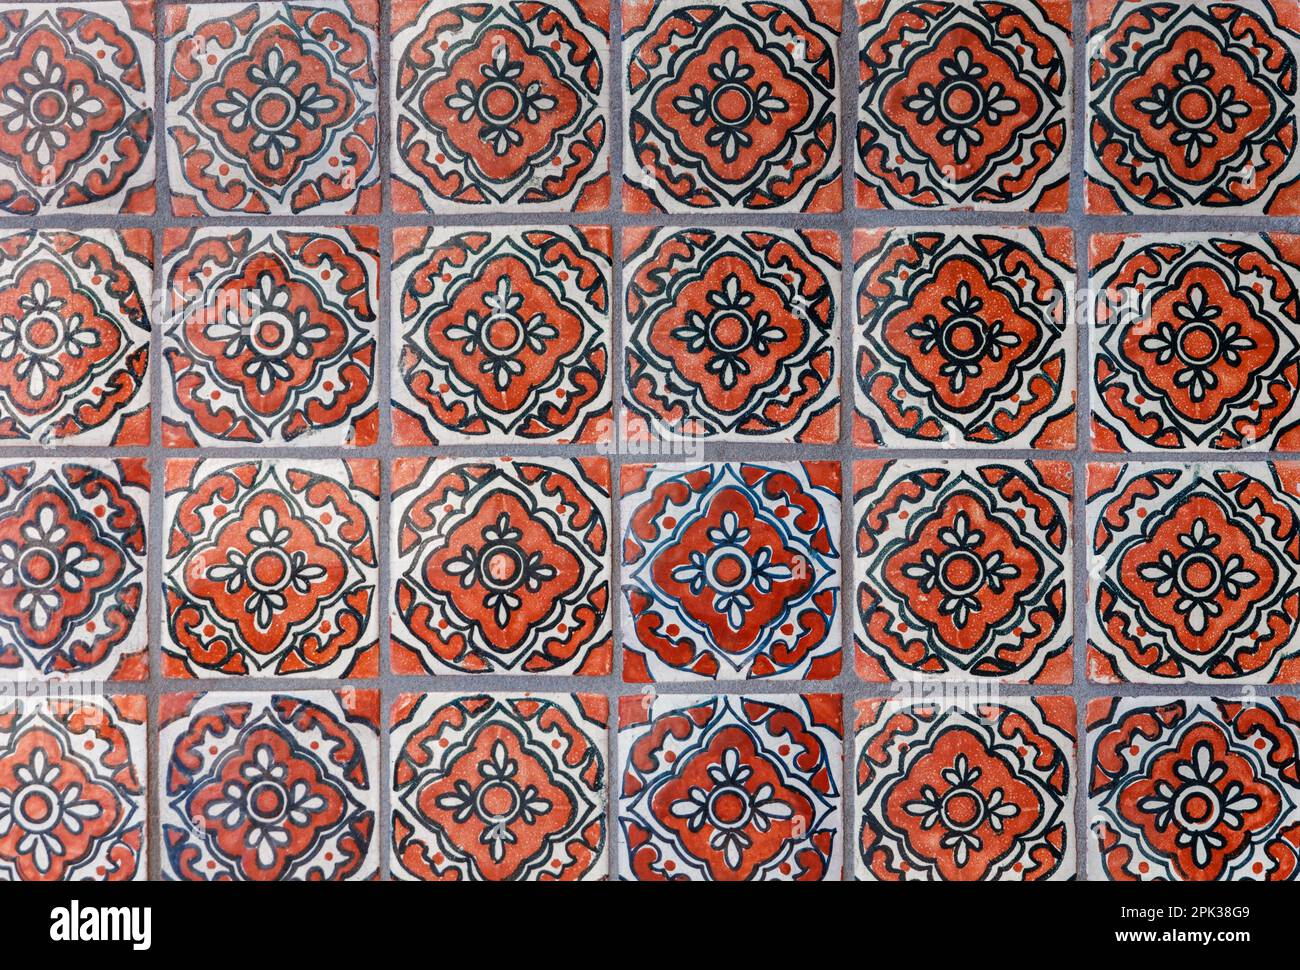 Handpainted Mexican Spanish Tile Wall Floor Stock Photo